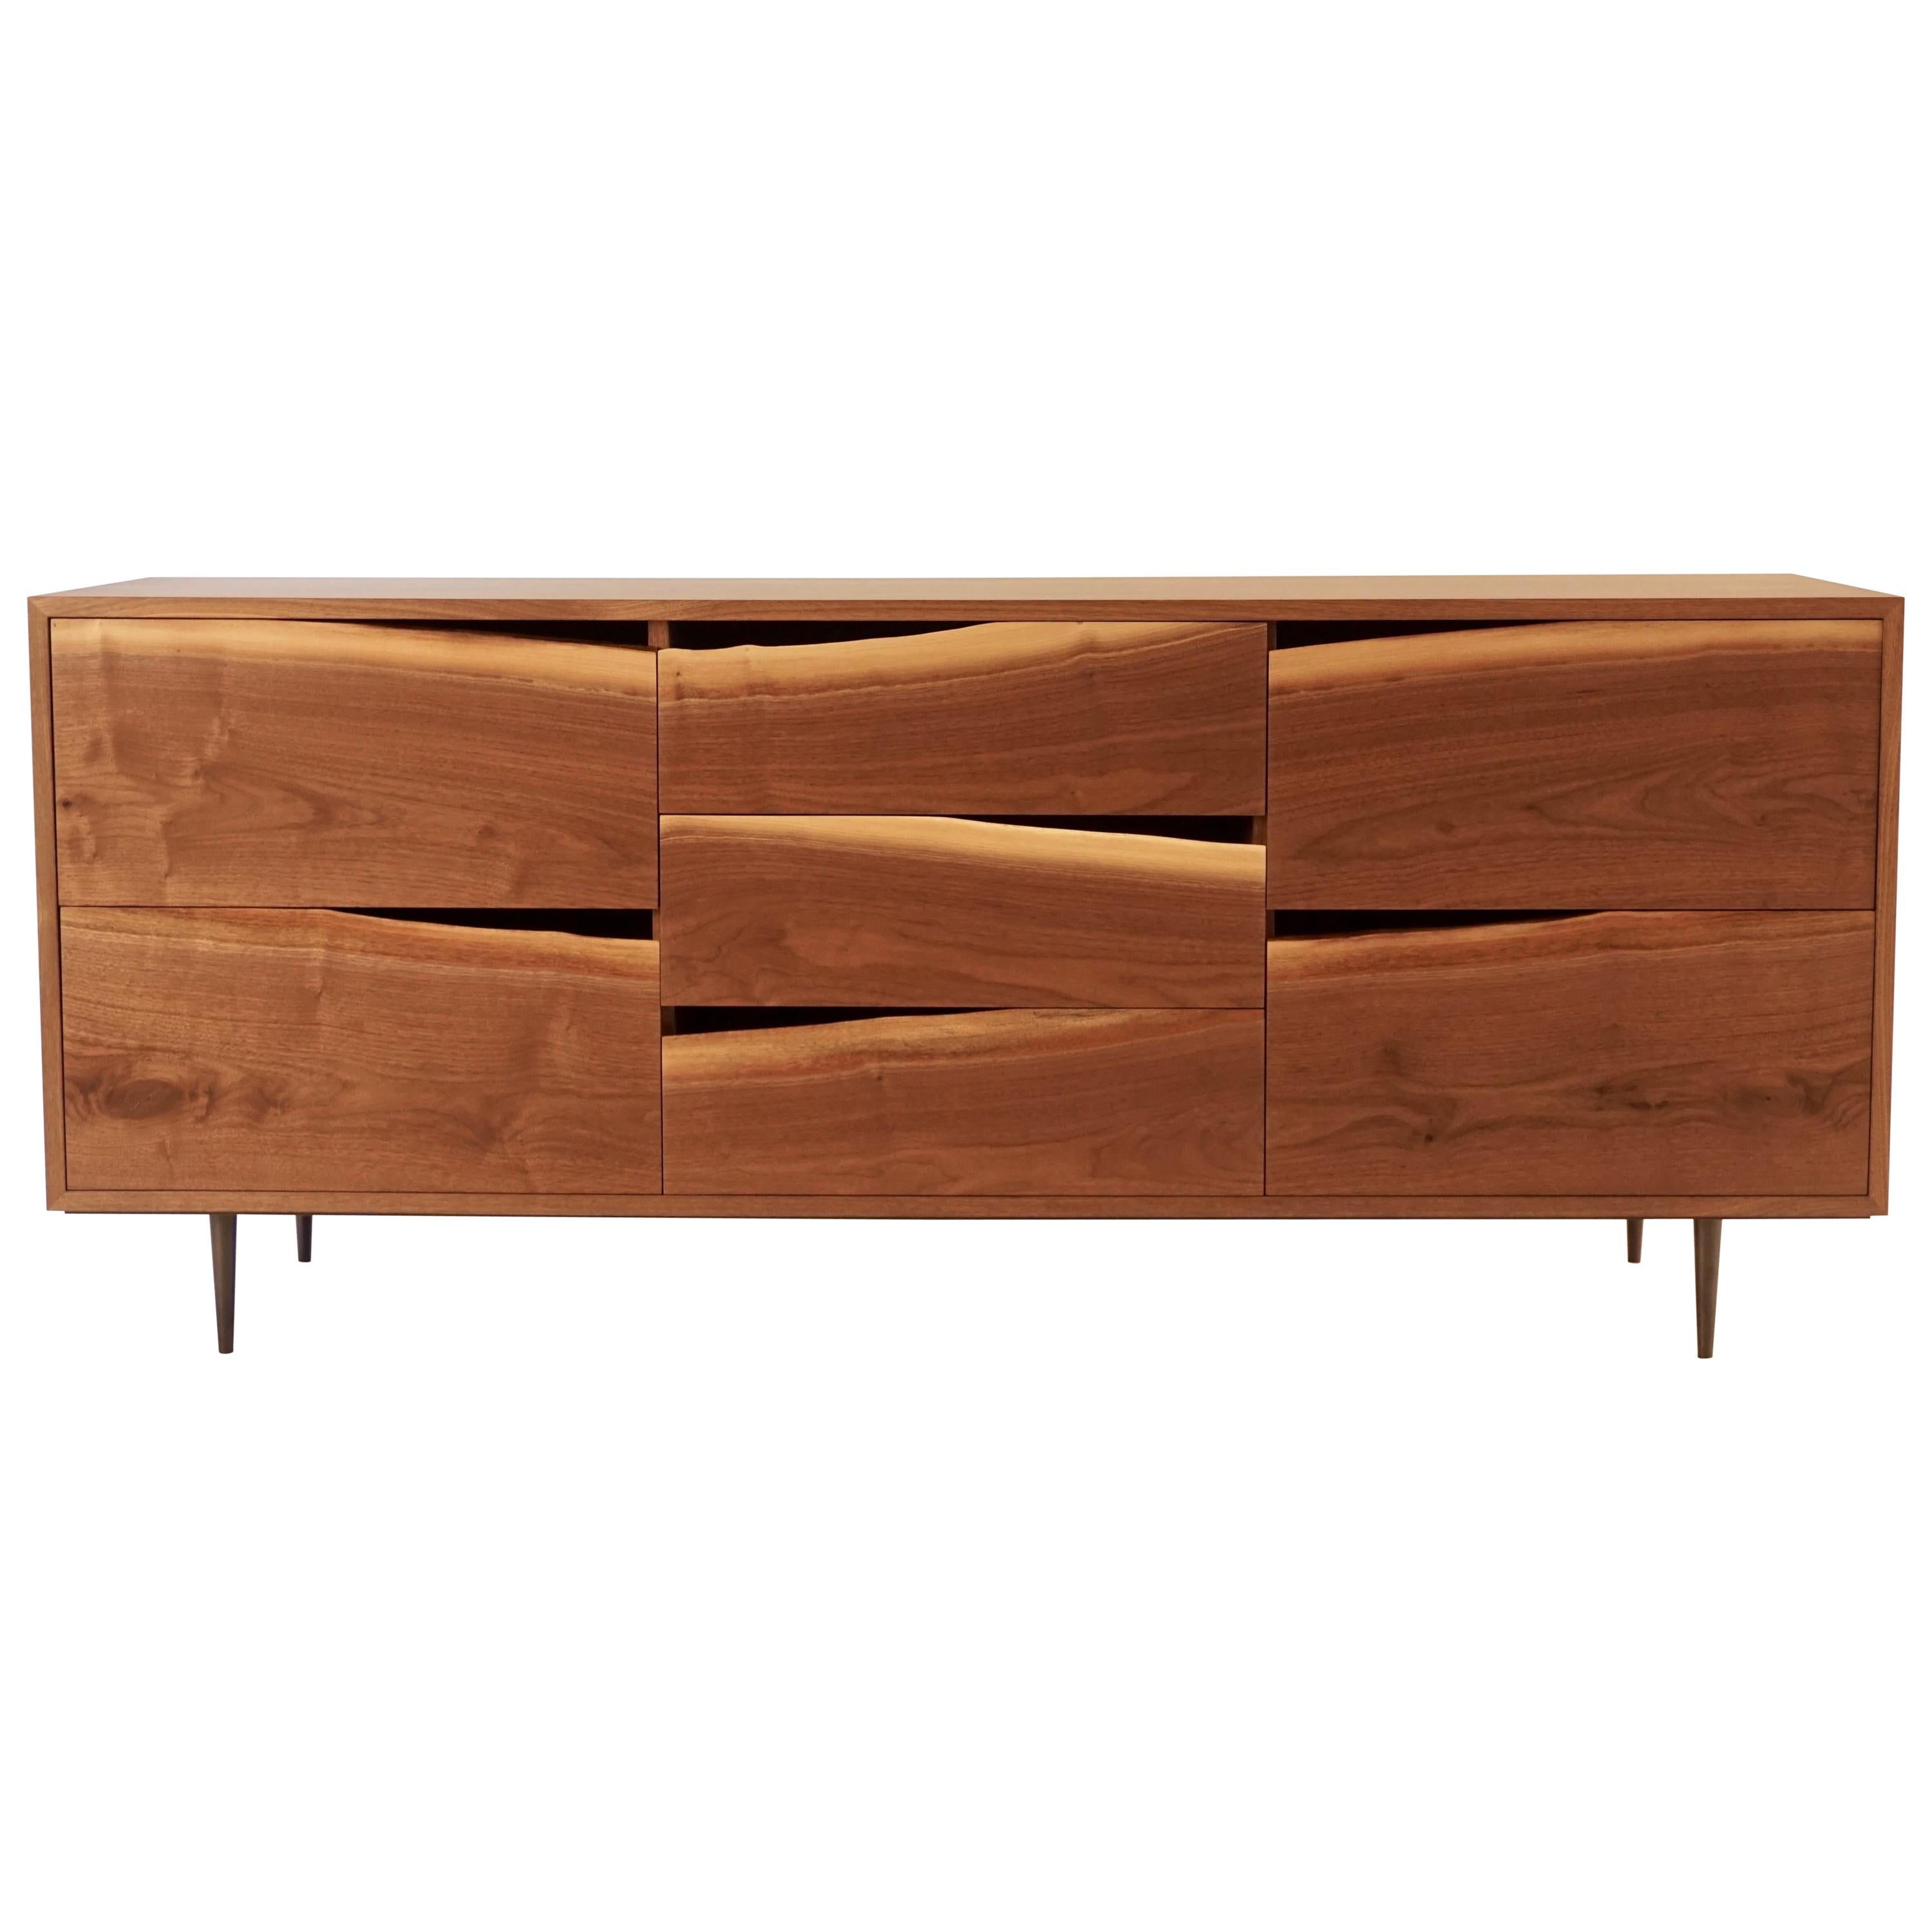 Walnut Credenza with Natural Edged Drawer-Fronts and Turned Bronze Legs